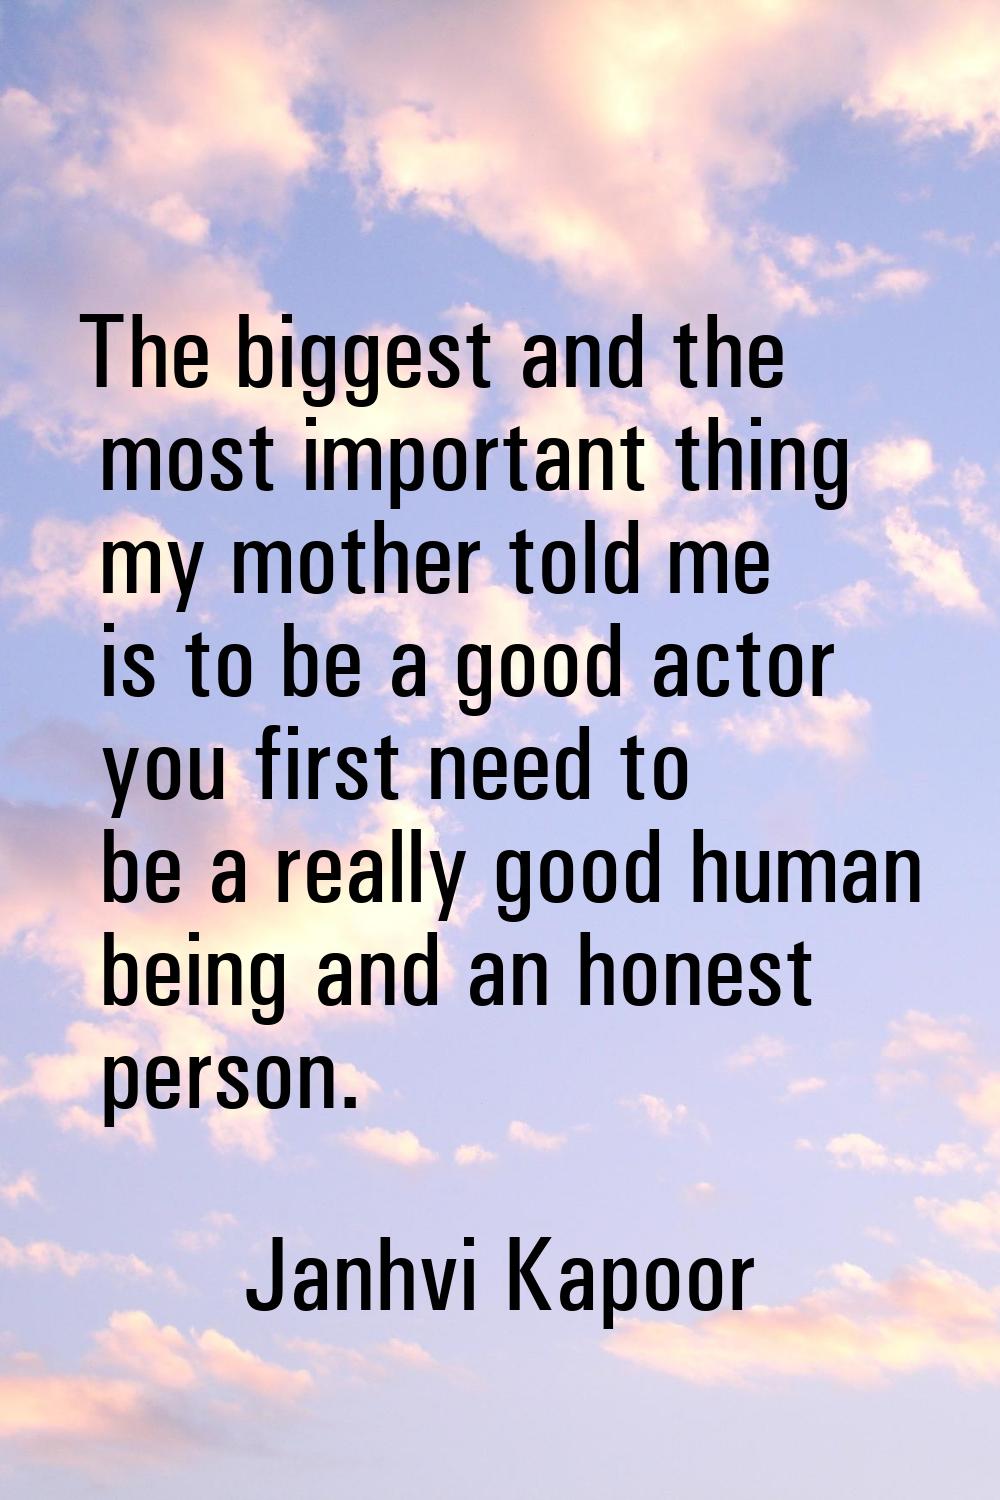 The biggest and the most important thing my mother told me is to be a good actor you first need to 